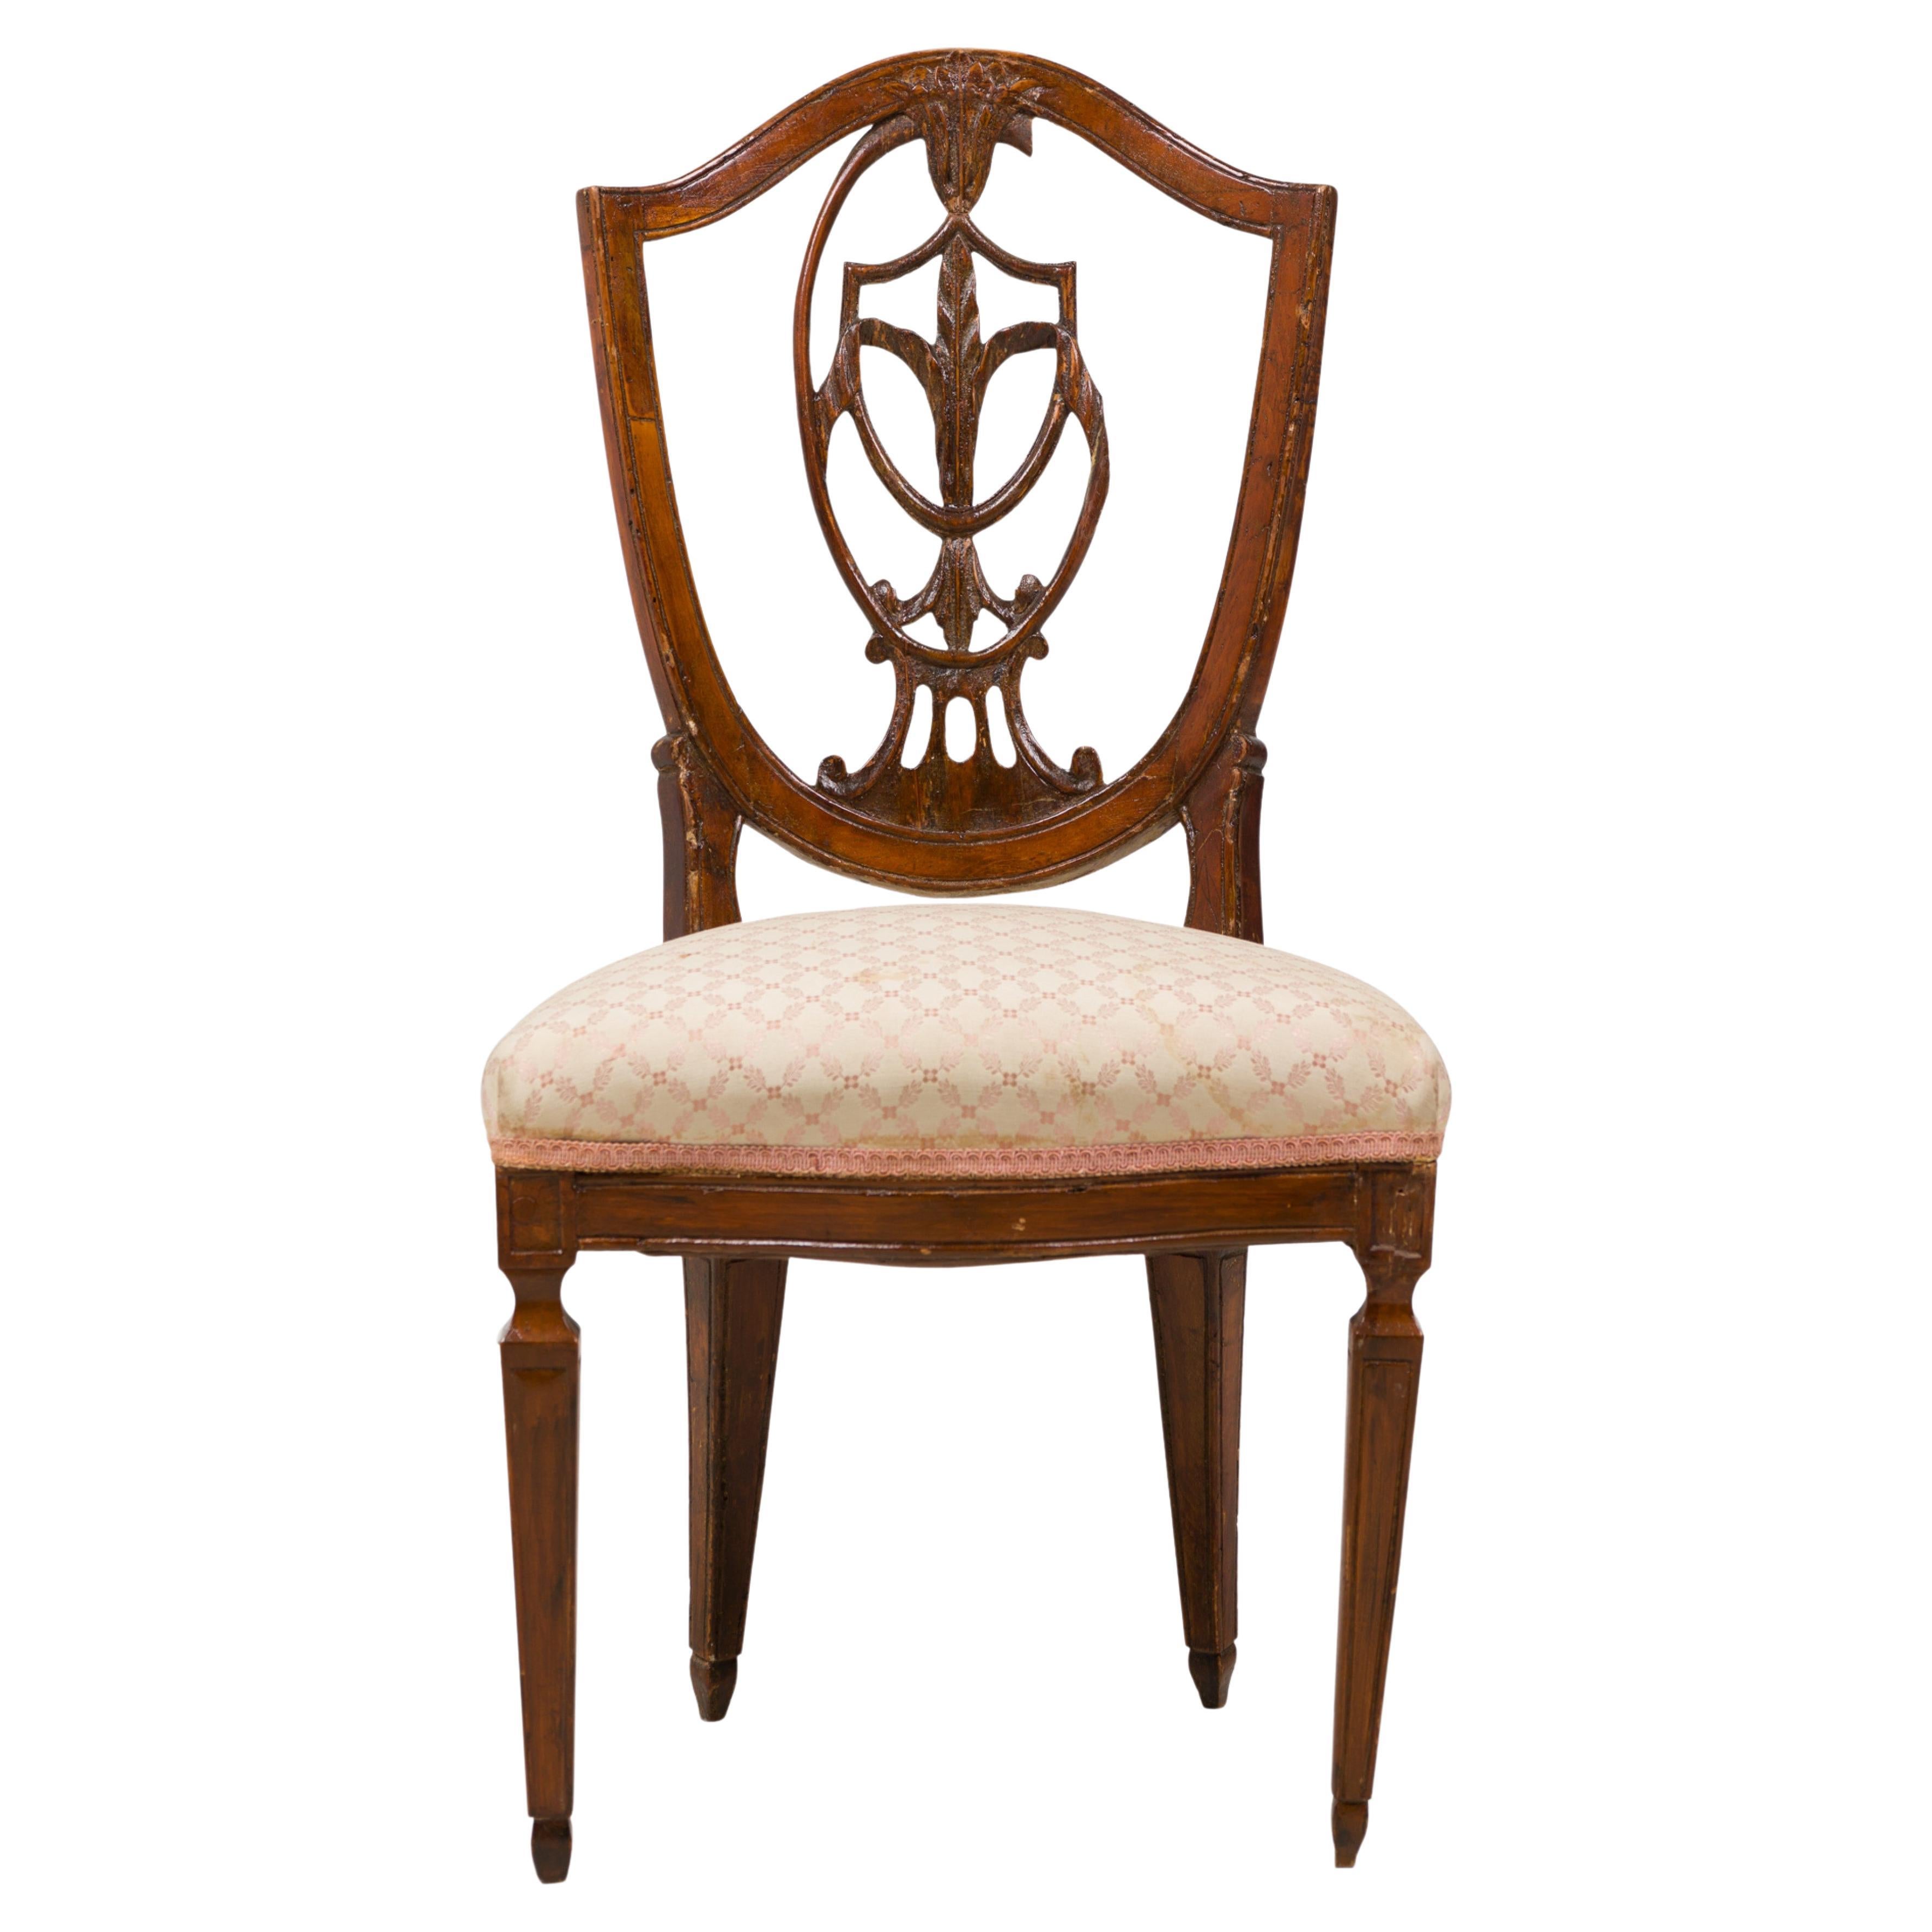 Italian Neoclassic Shield Back Dining/Side Chair W/ Floral Beige Upholstery